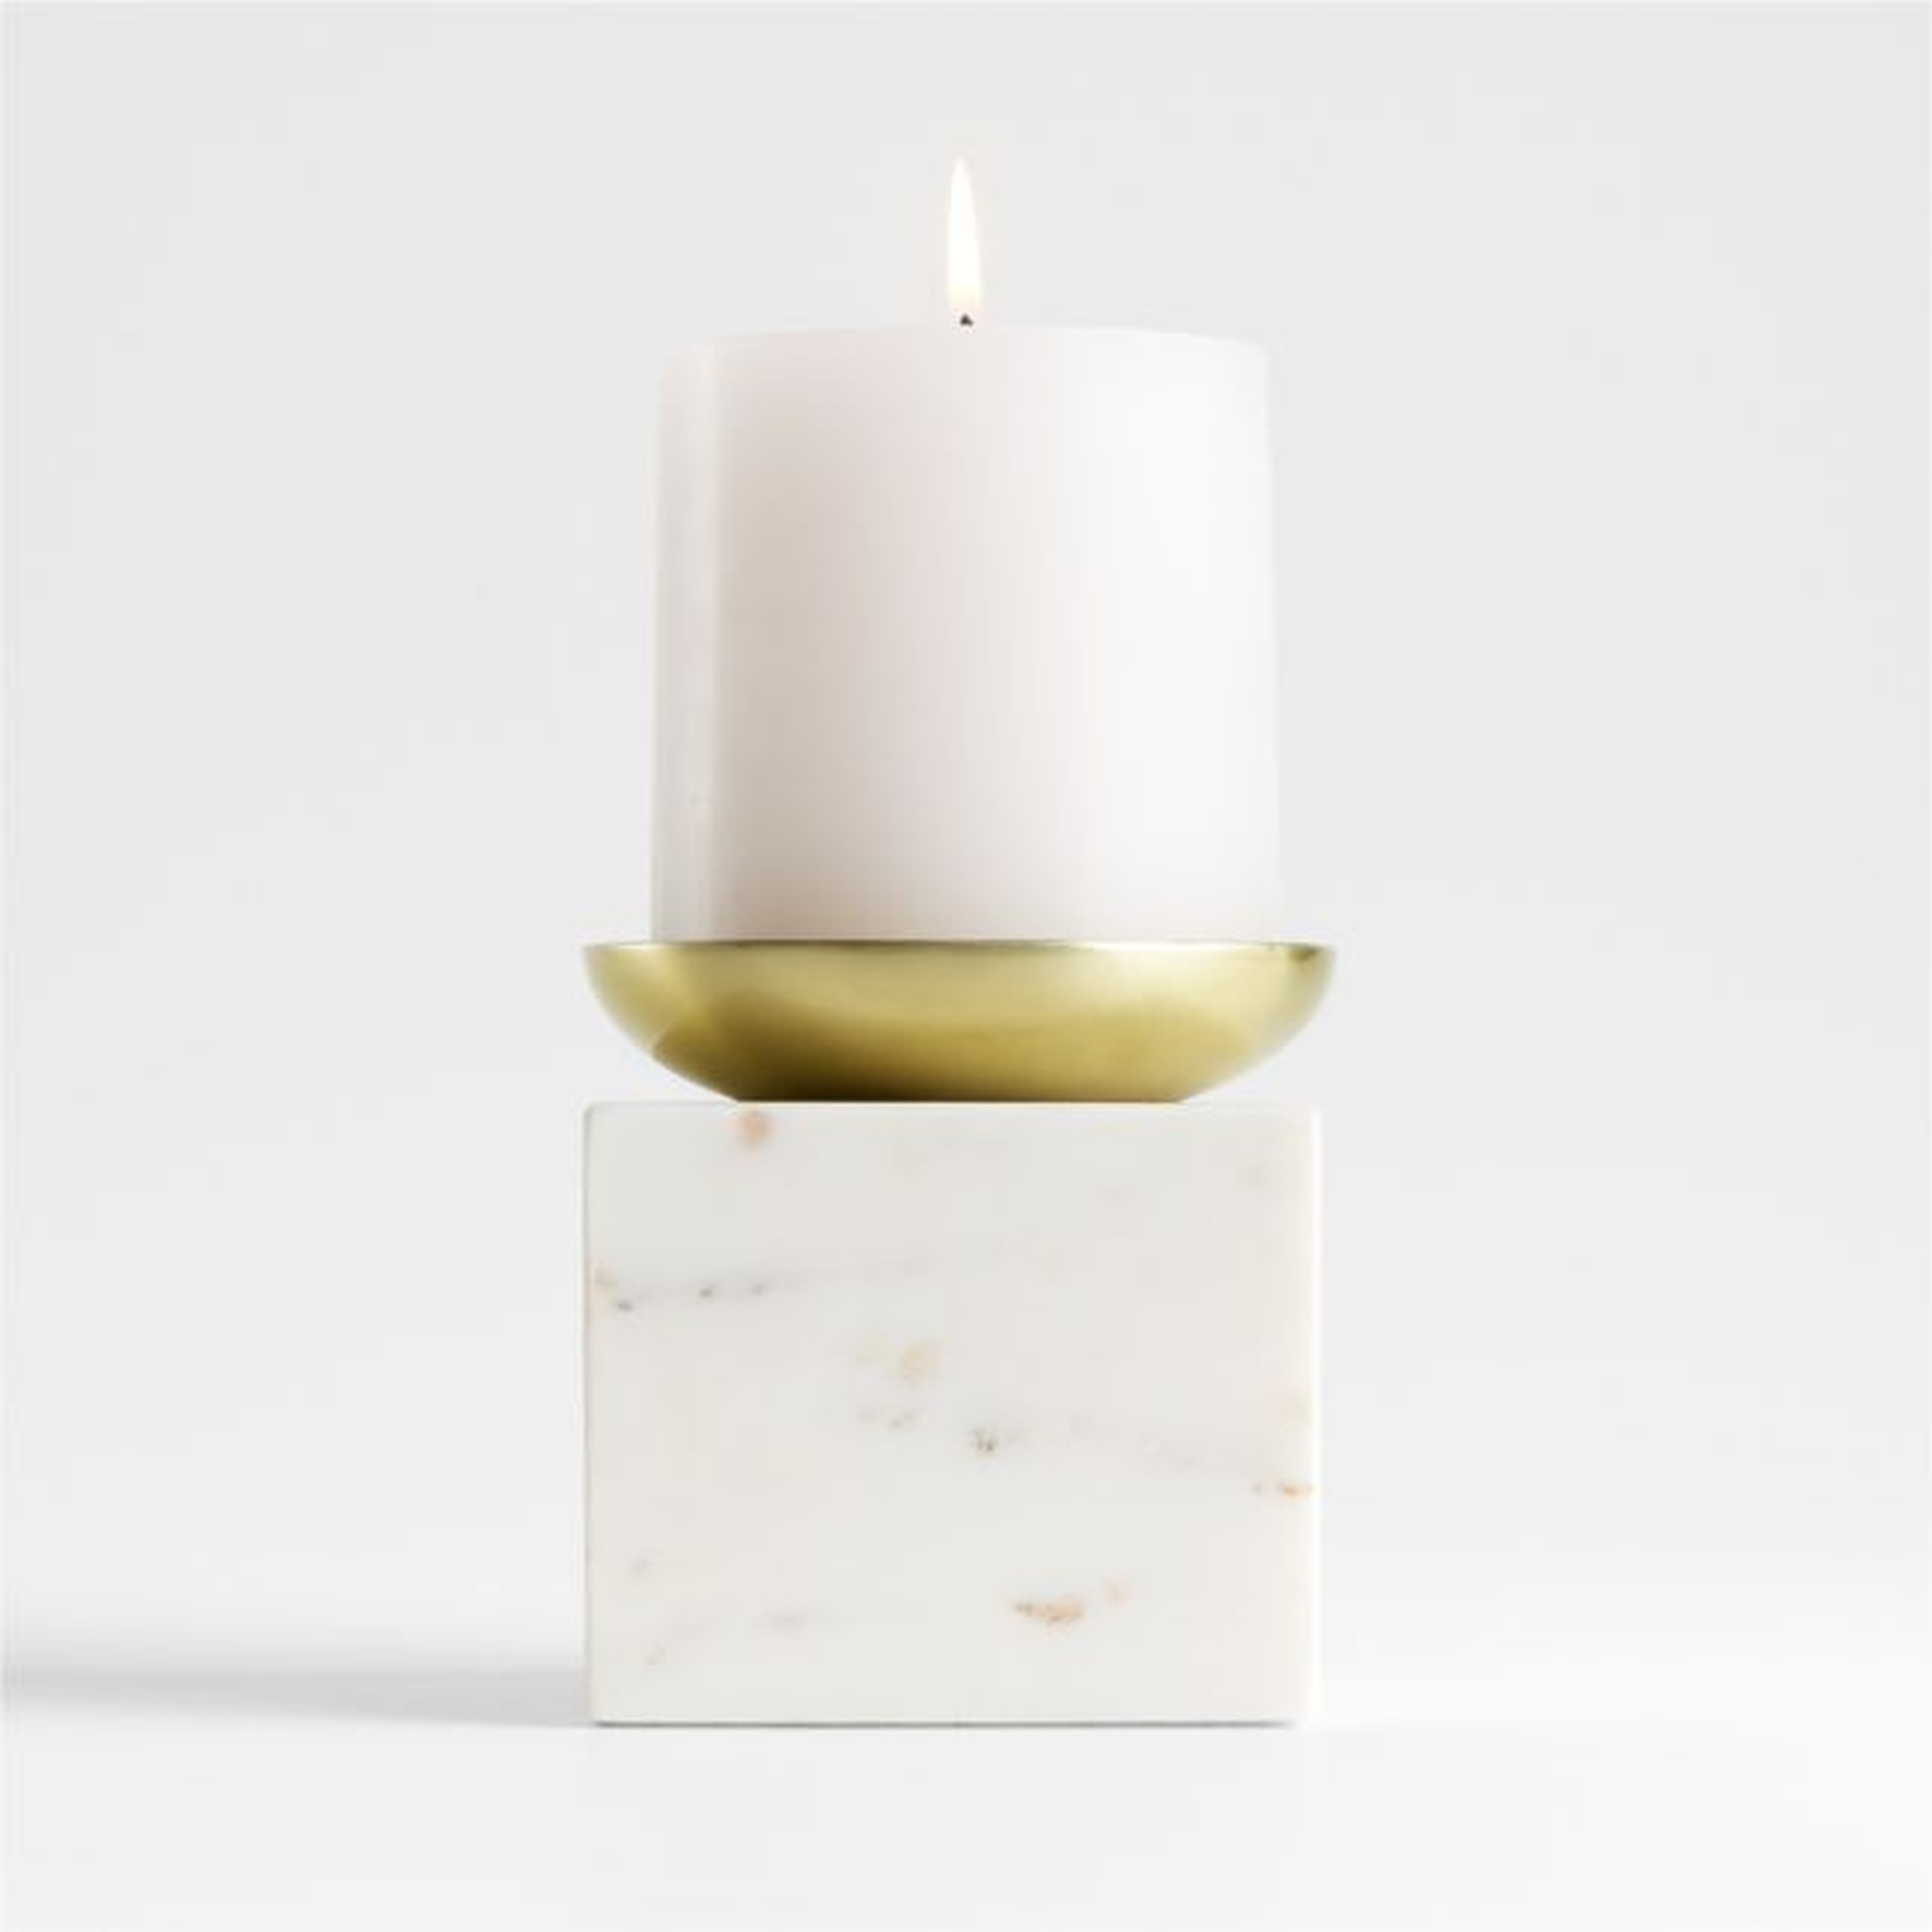 Sain Short White Marble Pillar Candle Holder - Crate and Barrel